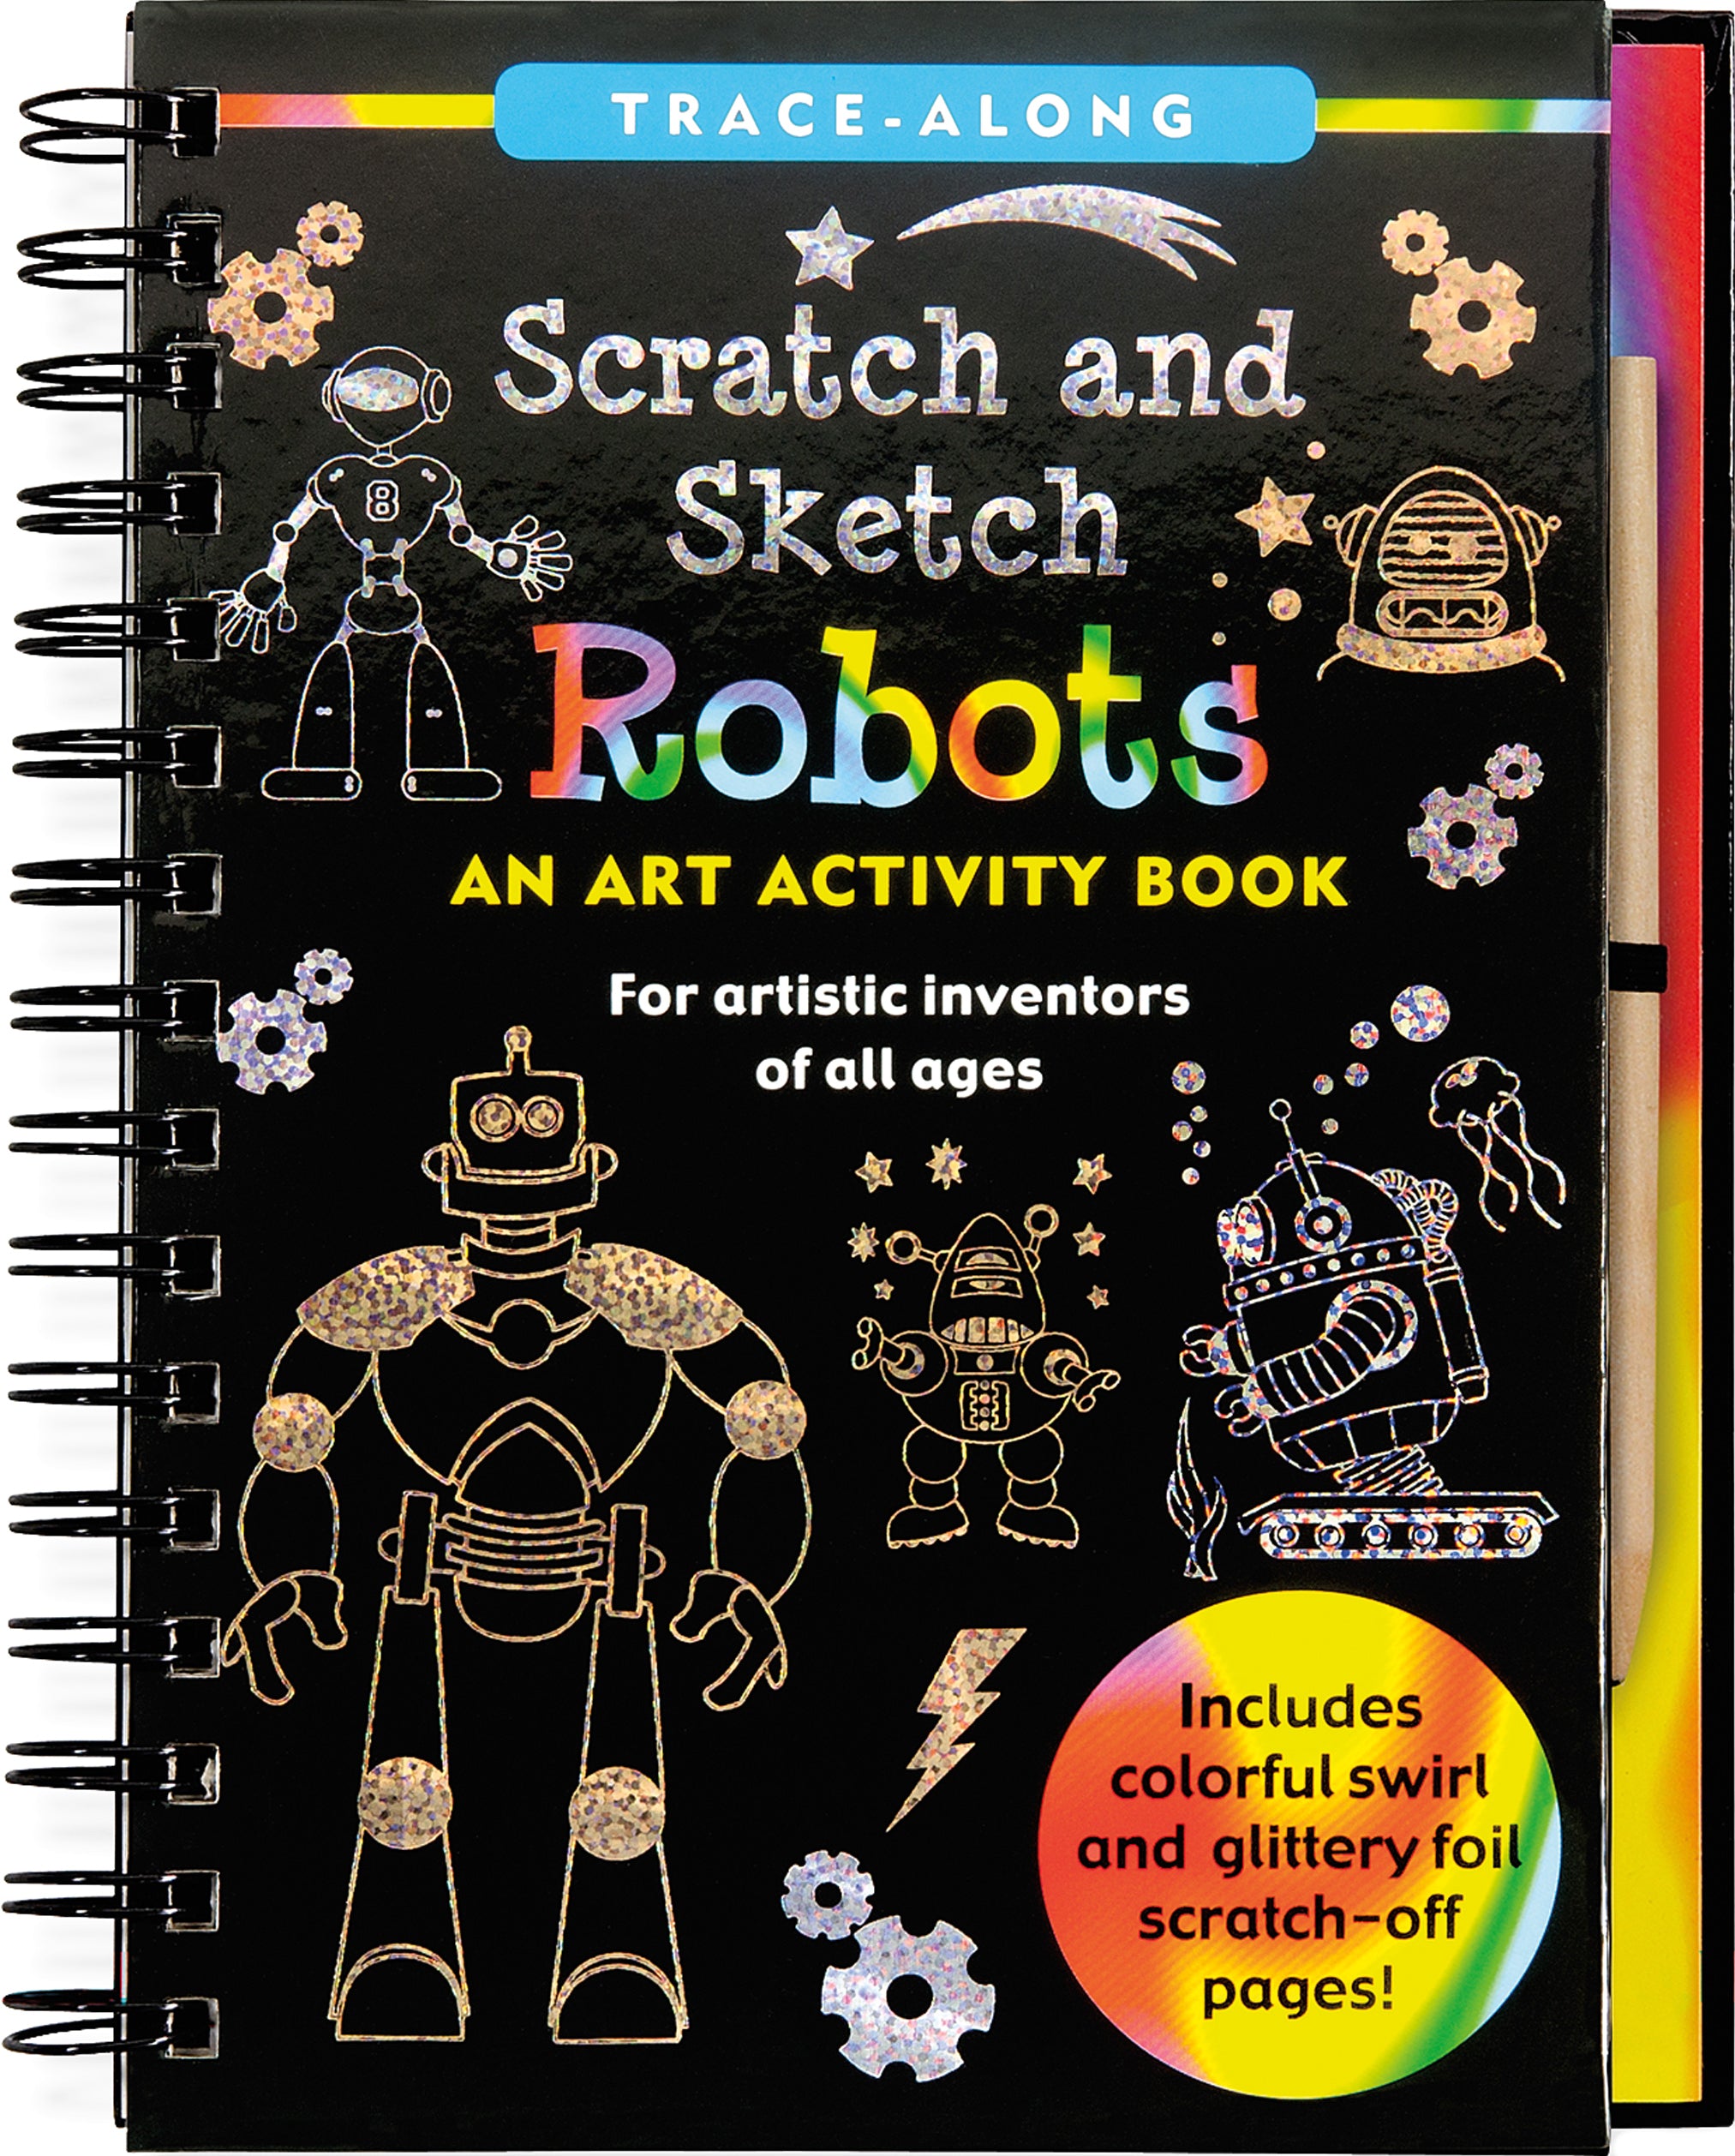 Super Scratch and Sketch - A2Z Science & Learning Toy Store